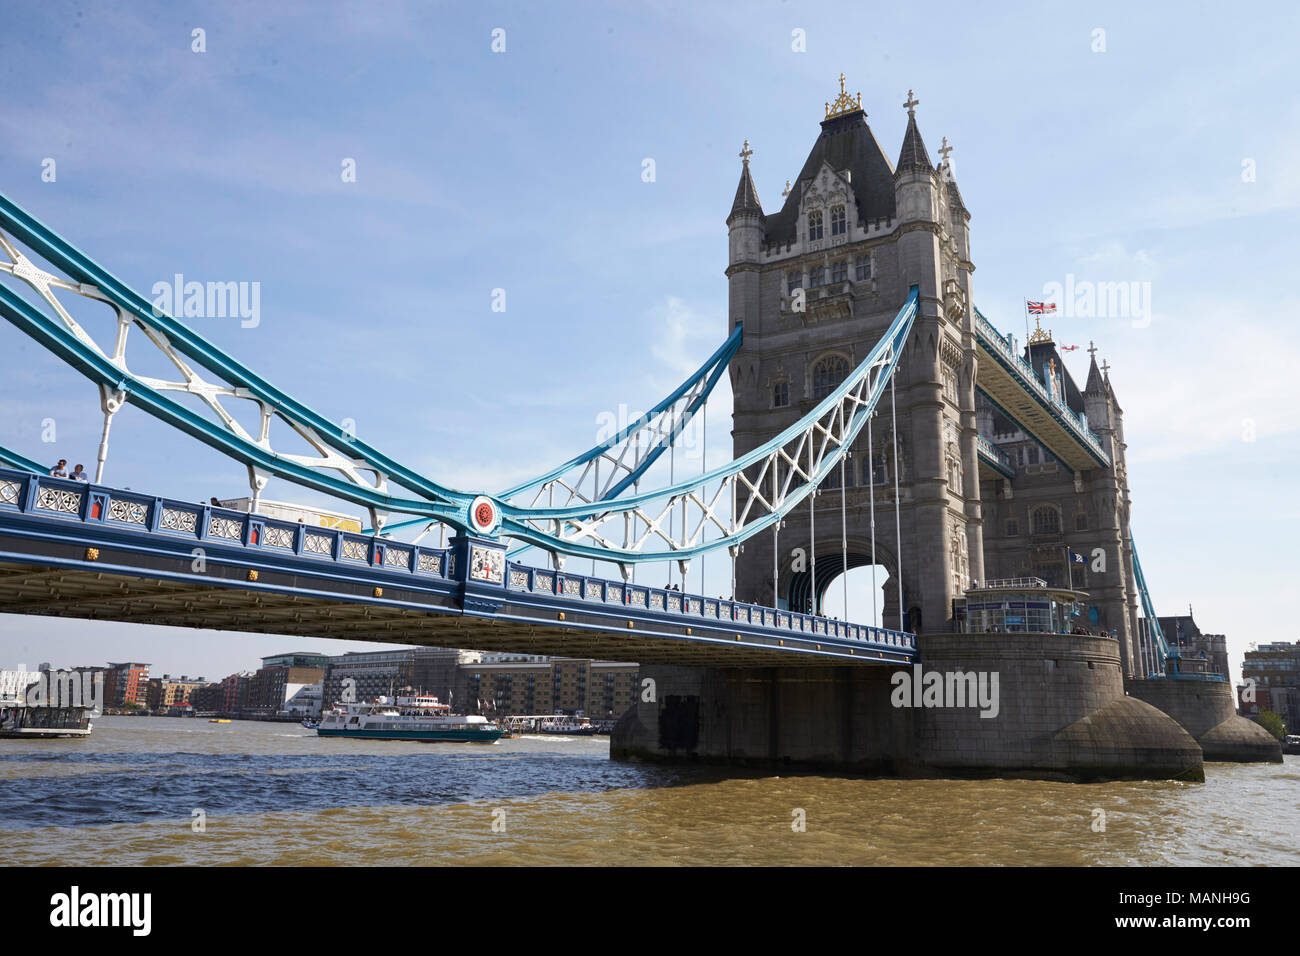 LONDON - MAY, 2017: Tower Bridge on the River Thames, City Of London, London, close up Stock Photo